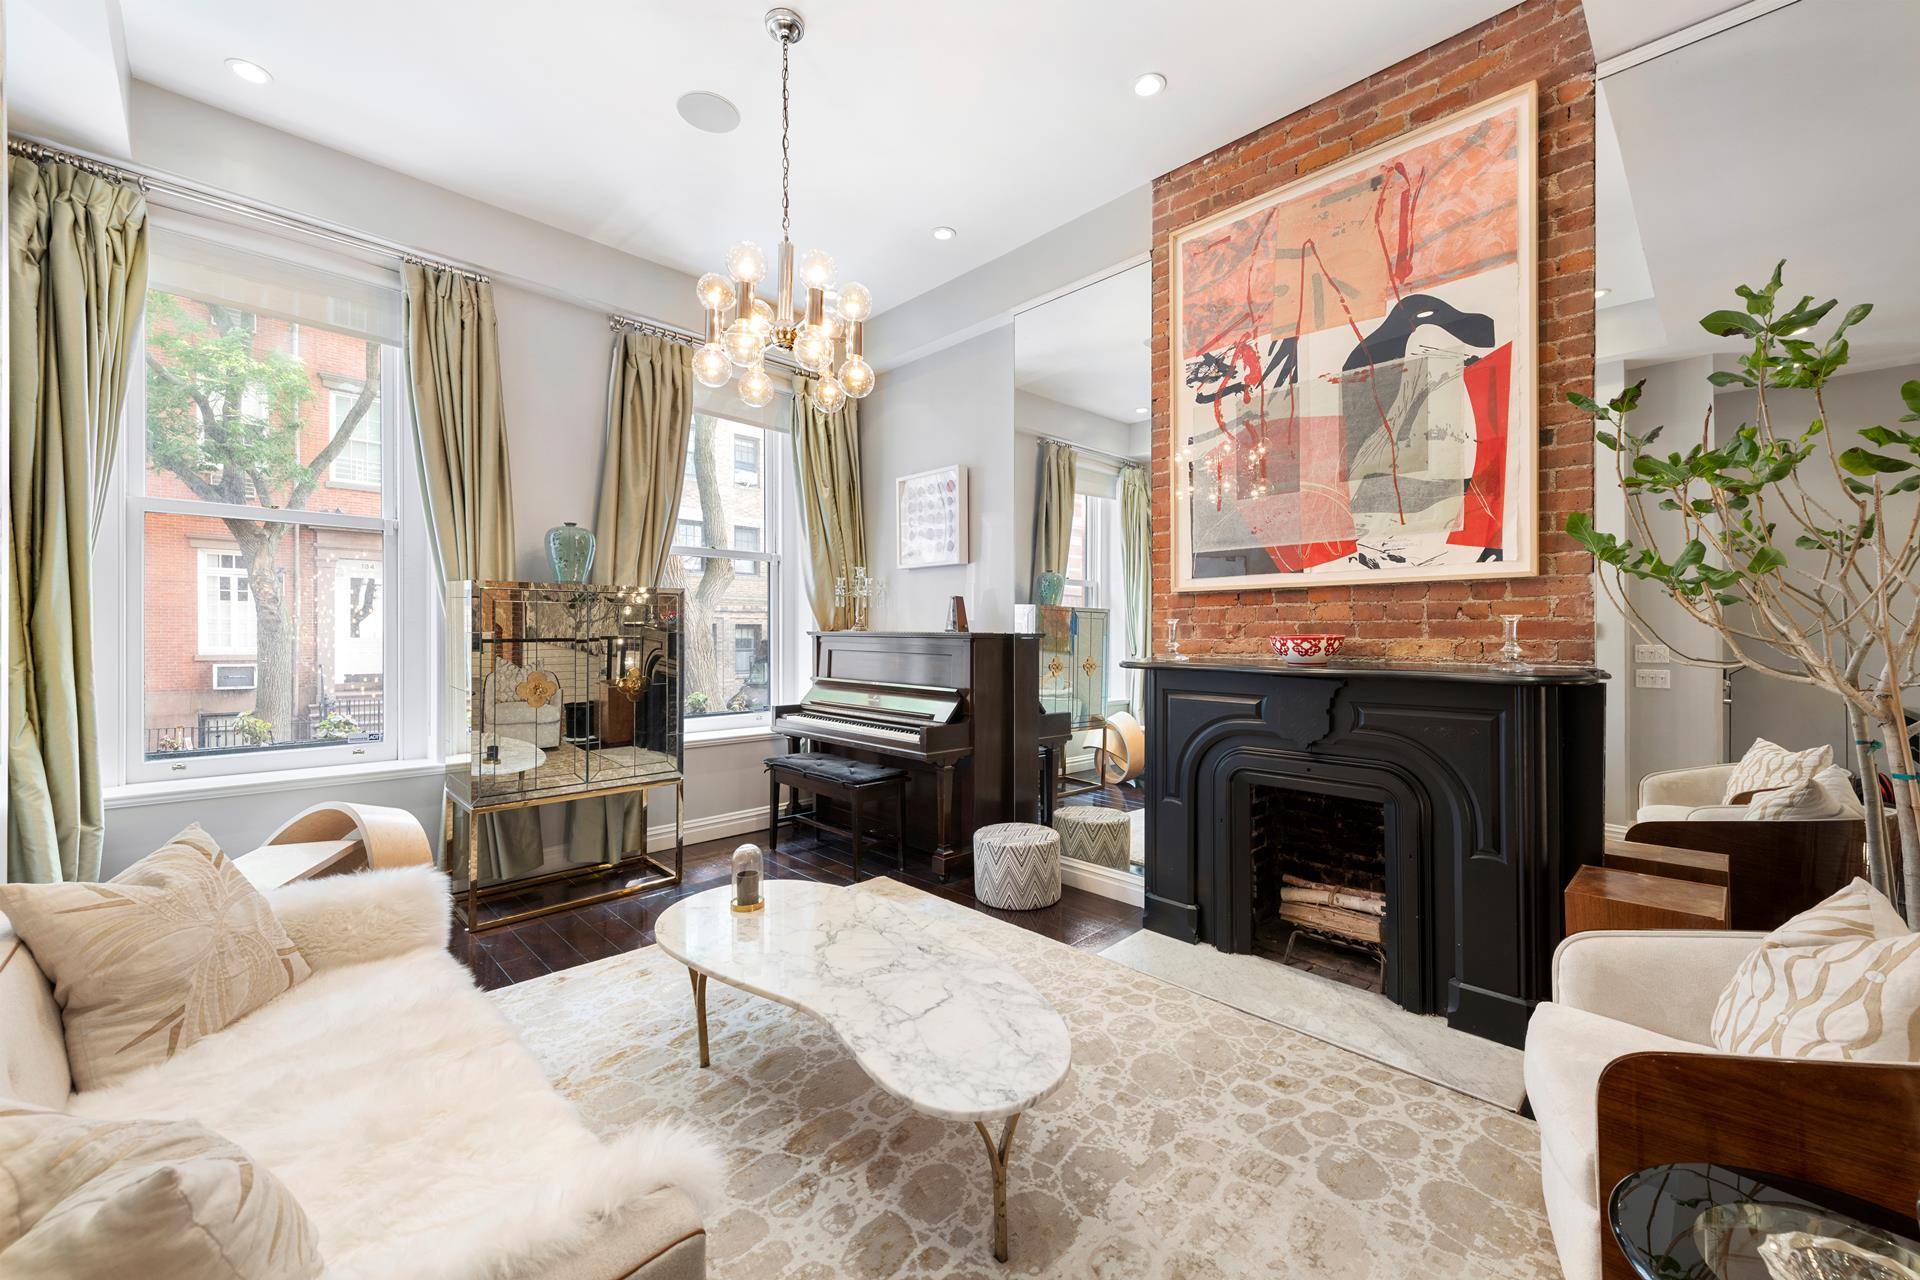 Enter into the parlor level of this spacious 3, 187 square foot, three bedroom triplex condominium in the heart of Greenwich Village.